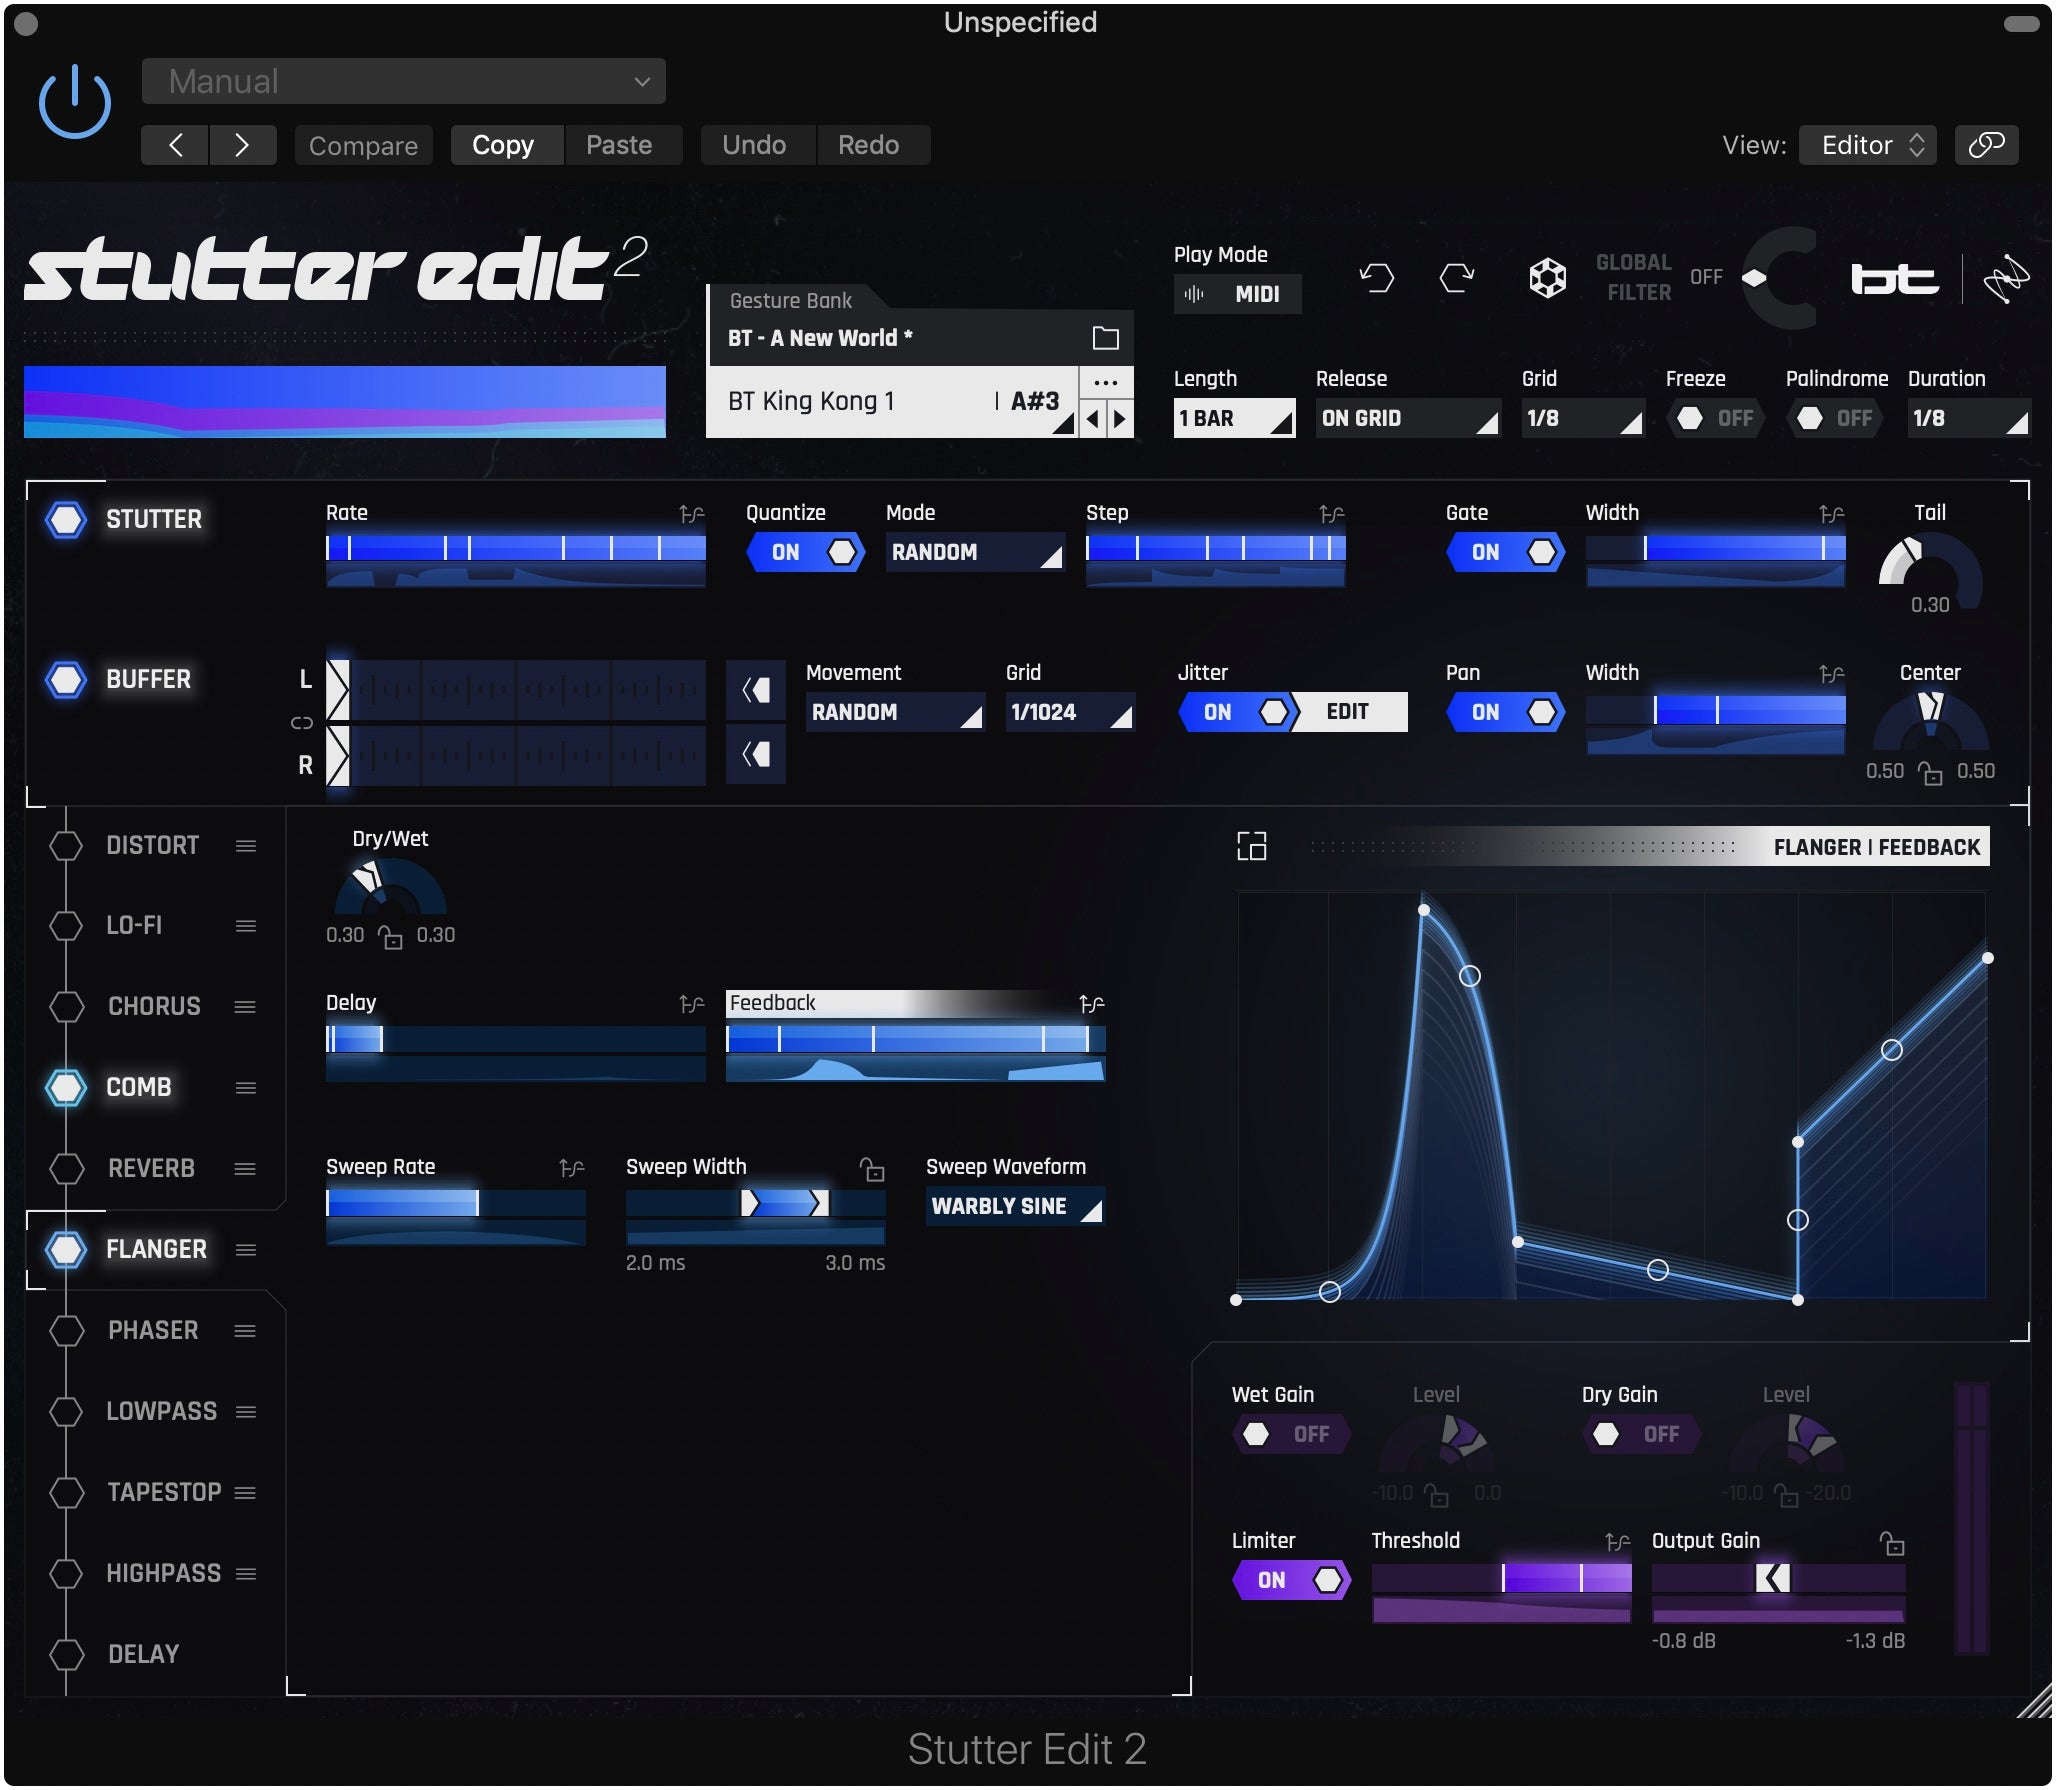 iZotope Stutter Edit 2 upgrade from Stutter Edit or Creative Suite 1